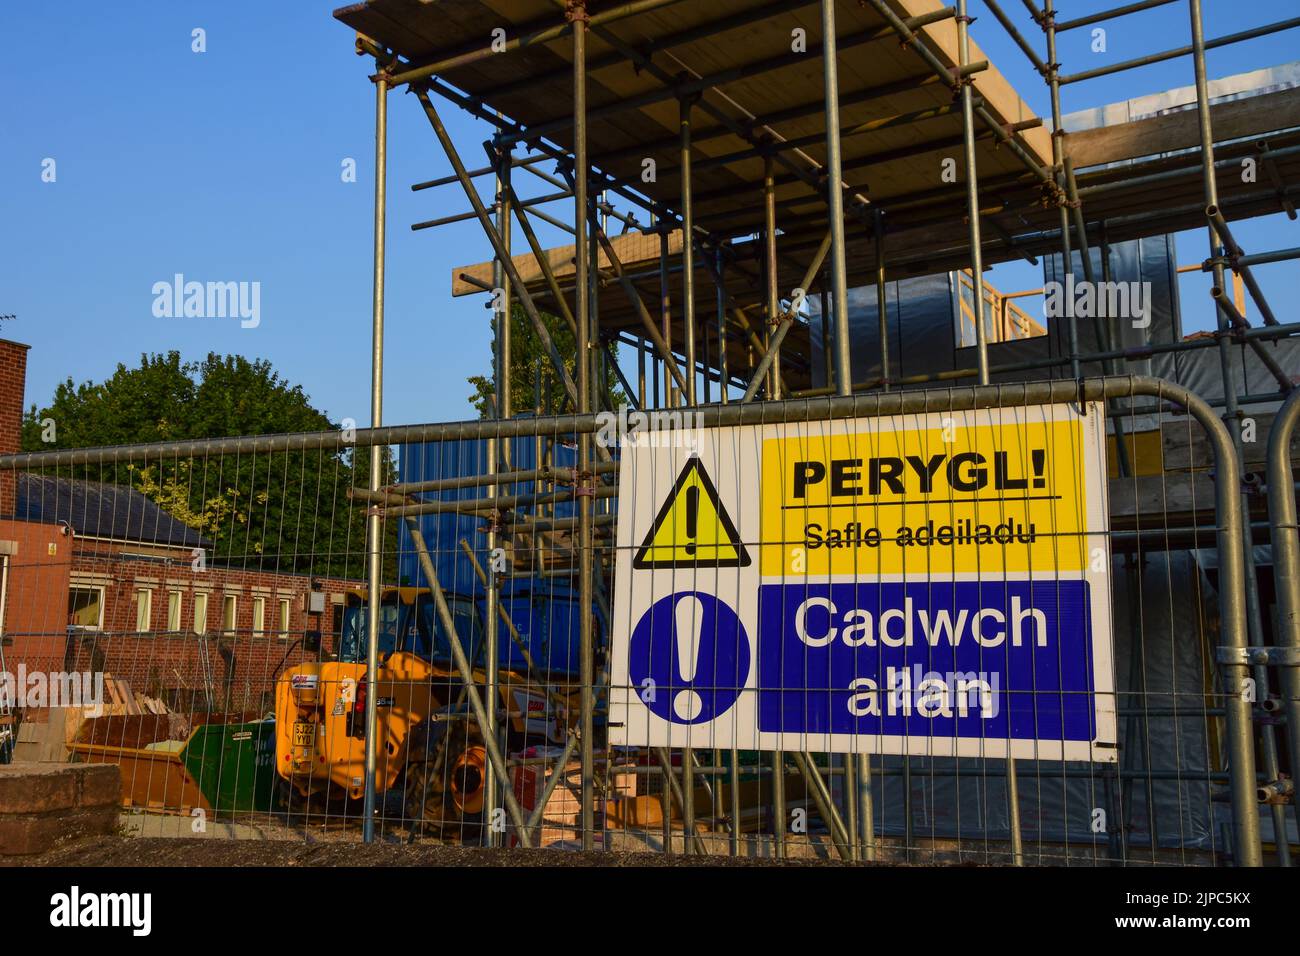 Holywell, Flintshire, UK: Aug 14, 2022: A warning sign on fencing at a building site. The sign is Welsh language Stock Photo